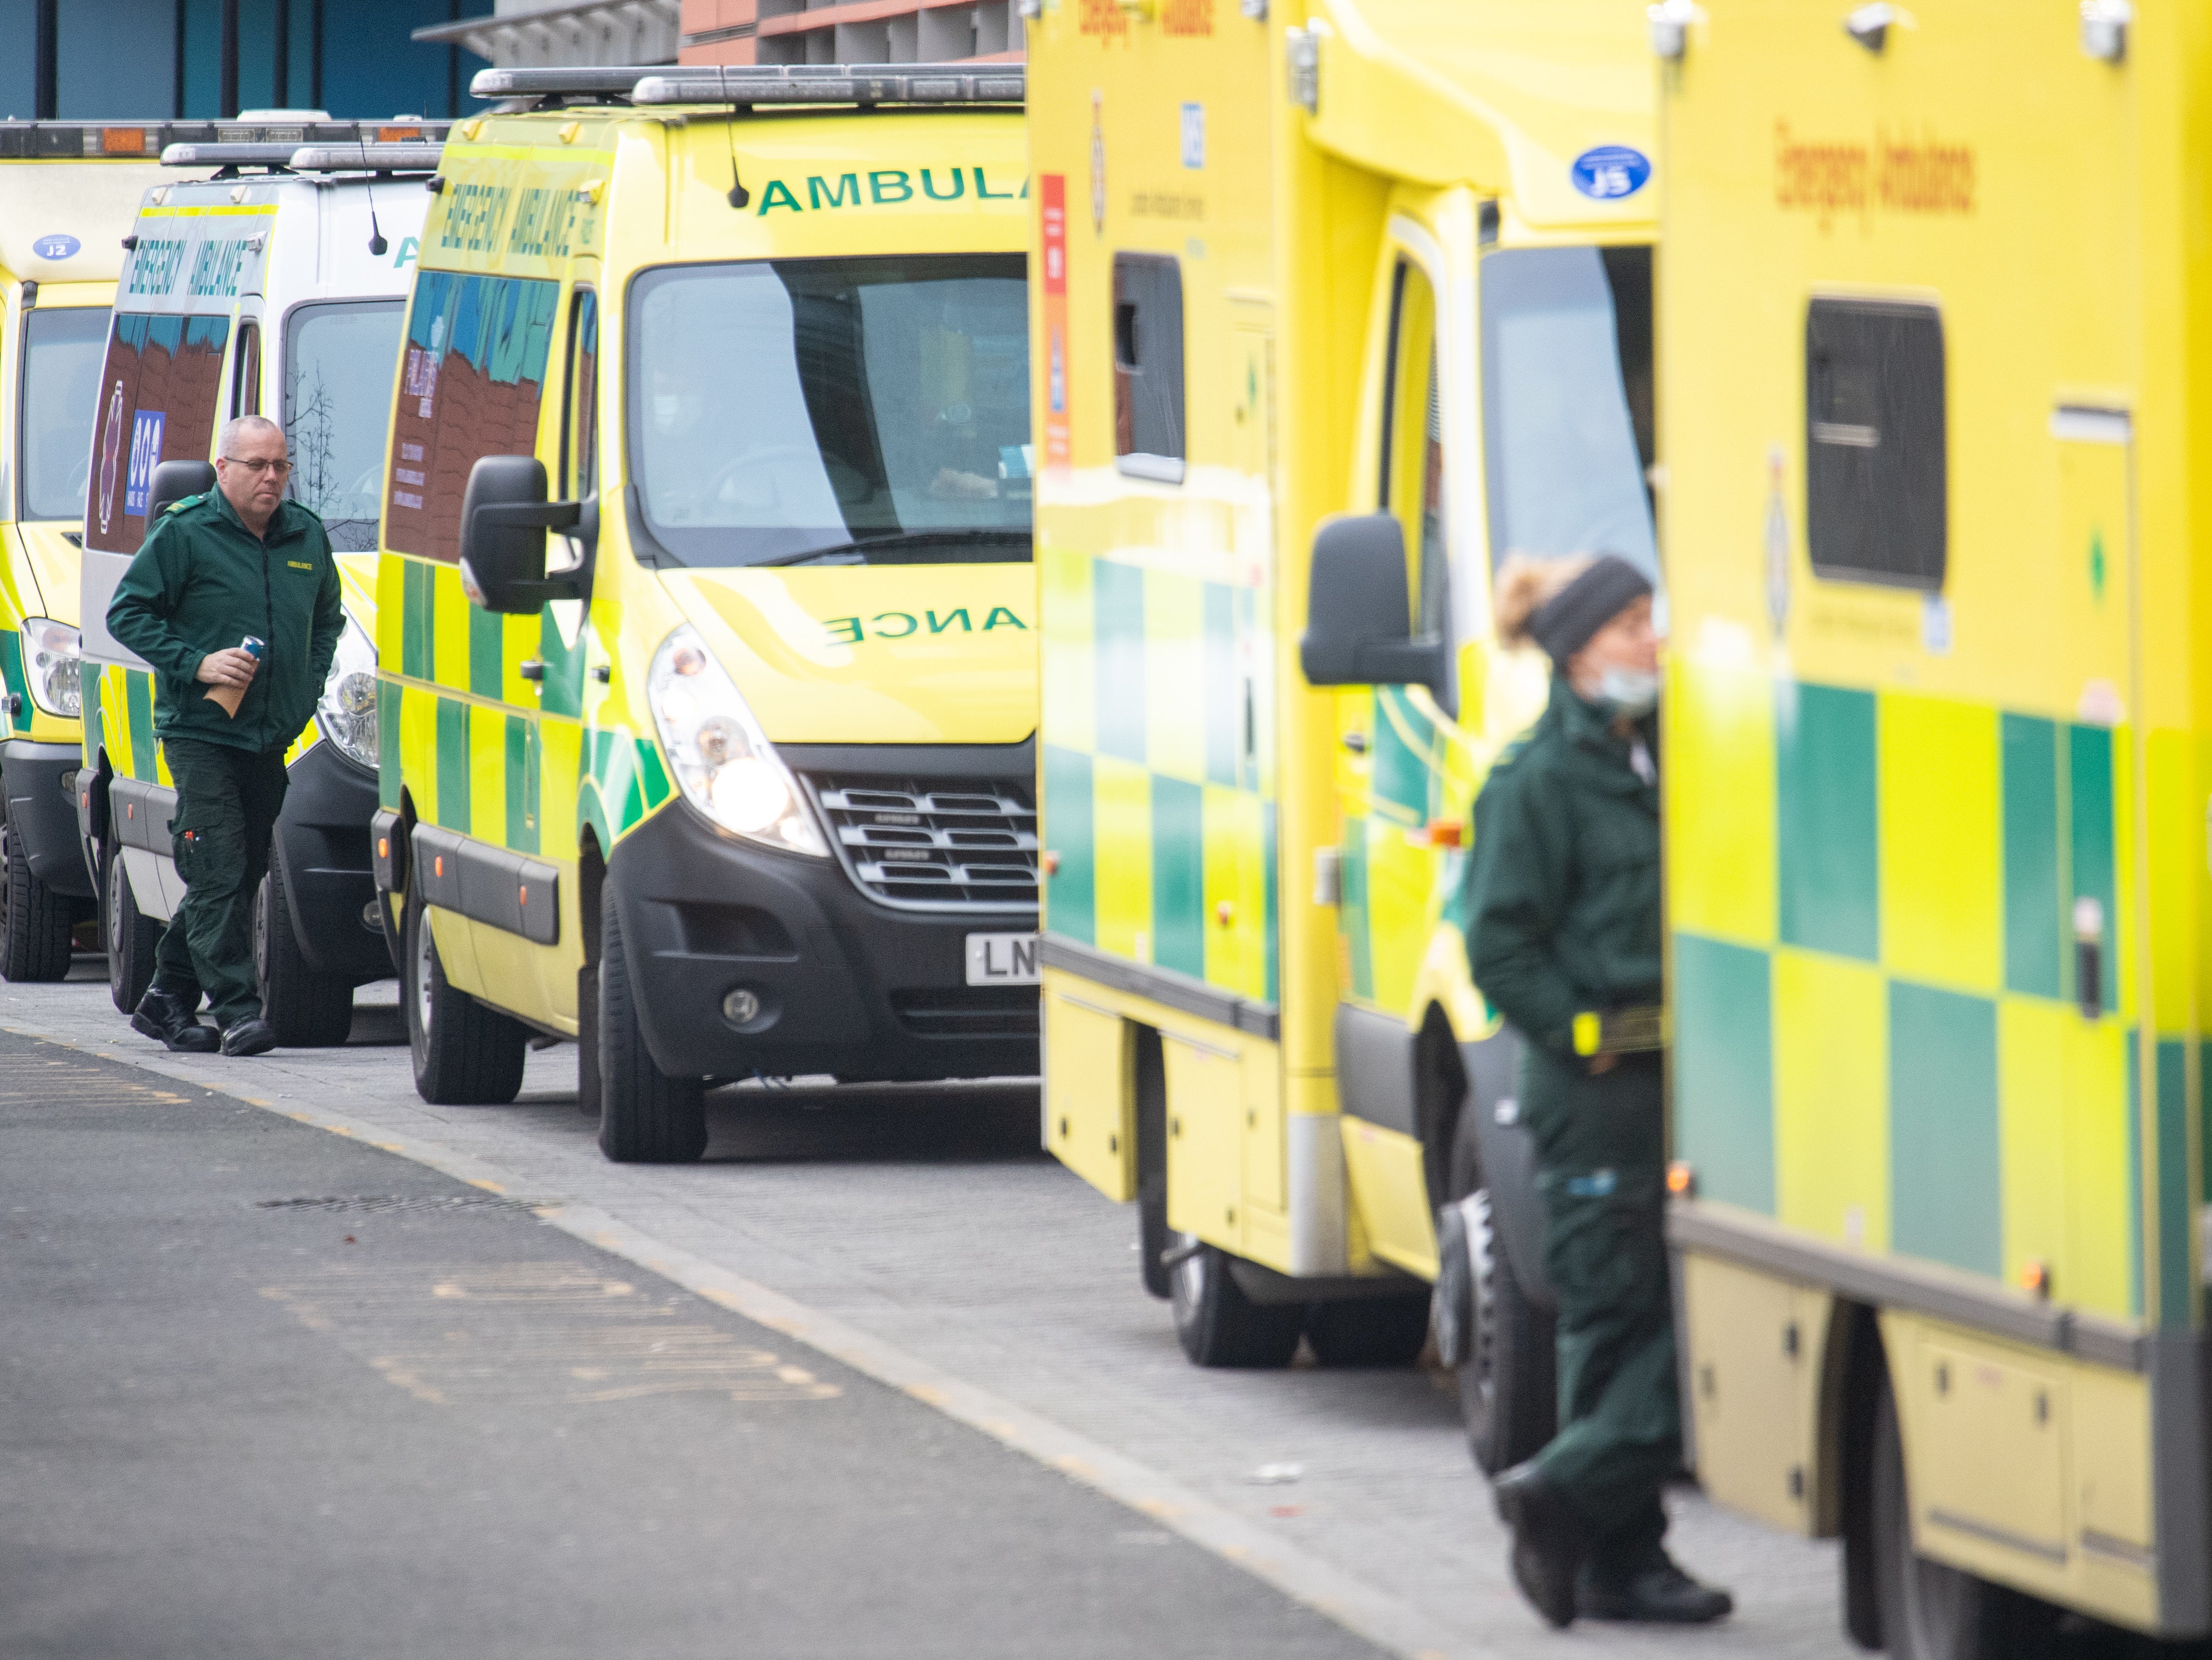 Ambulances forced to wait outside the Royal London Hospital in Whitechapel causing long delays in getting to patients